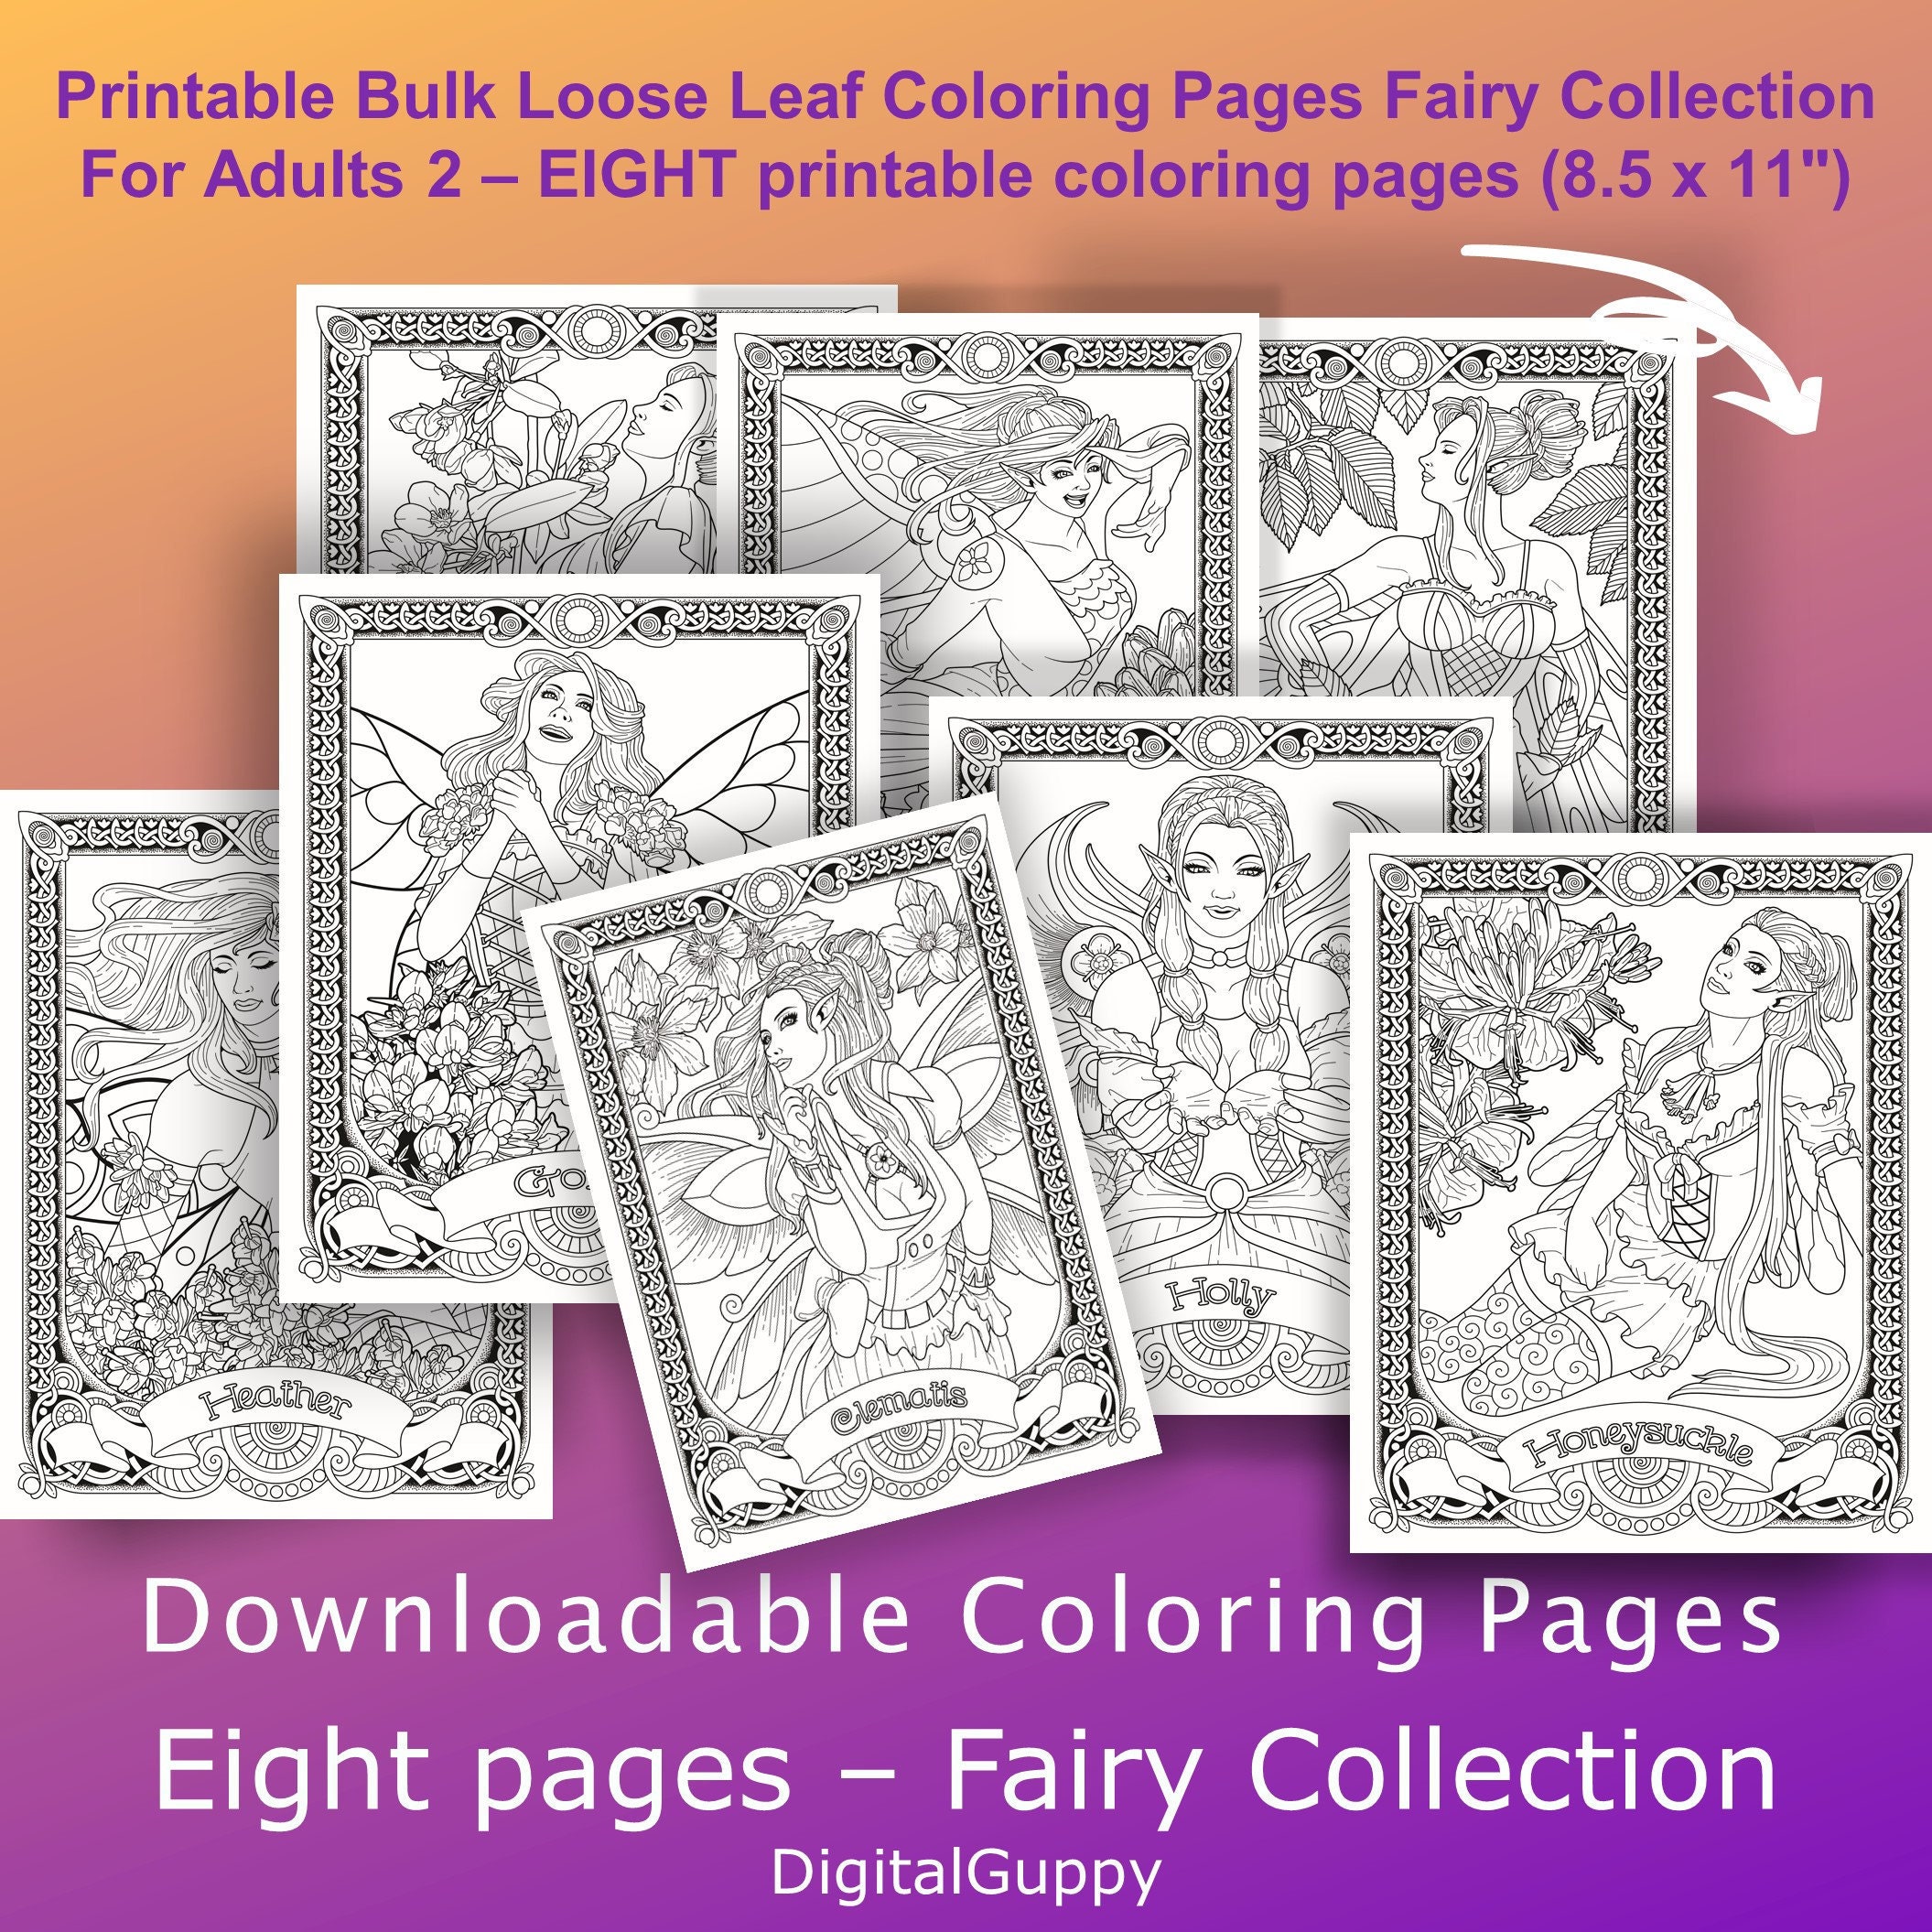 Printable Bulk Loose Leaf Coloring Pages Gorgeous Fairy Collection 2 EIGHT Printable  Coloring Pages: Downloadable Pages 8.5 X 11 